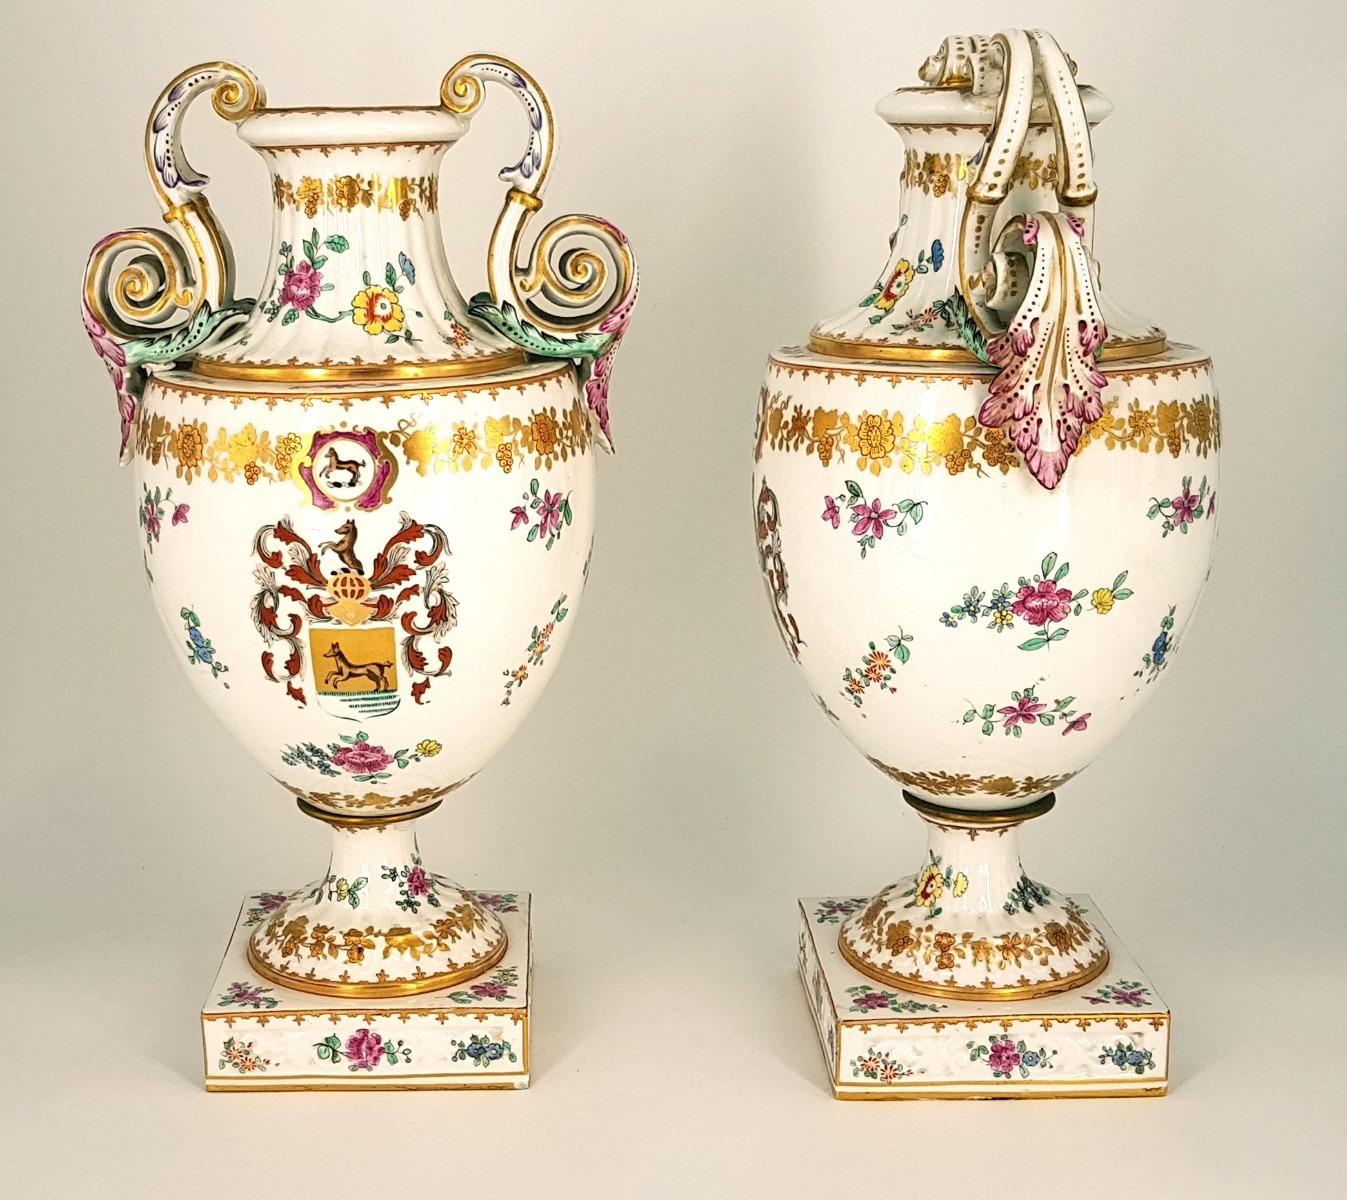 Pair of white crater vases in glazed, gilded and decorated terracotta with landscapes realized in the 19th century.

Very good conditions.

This artwork is shipped from Italy. Under existing legislation, any artwork in Italy created over 70